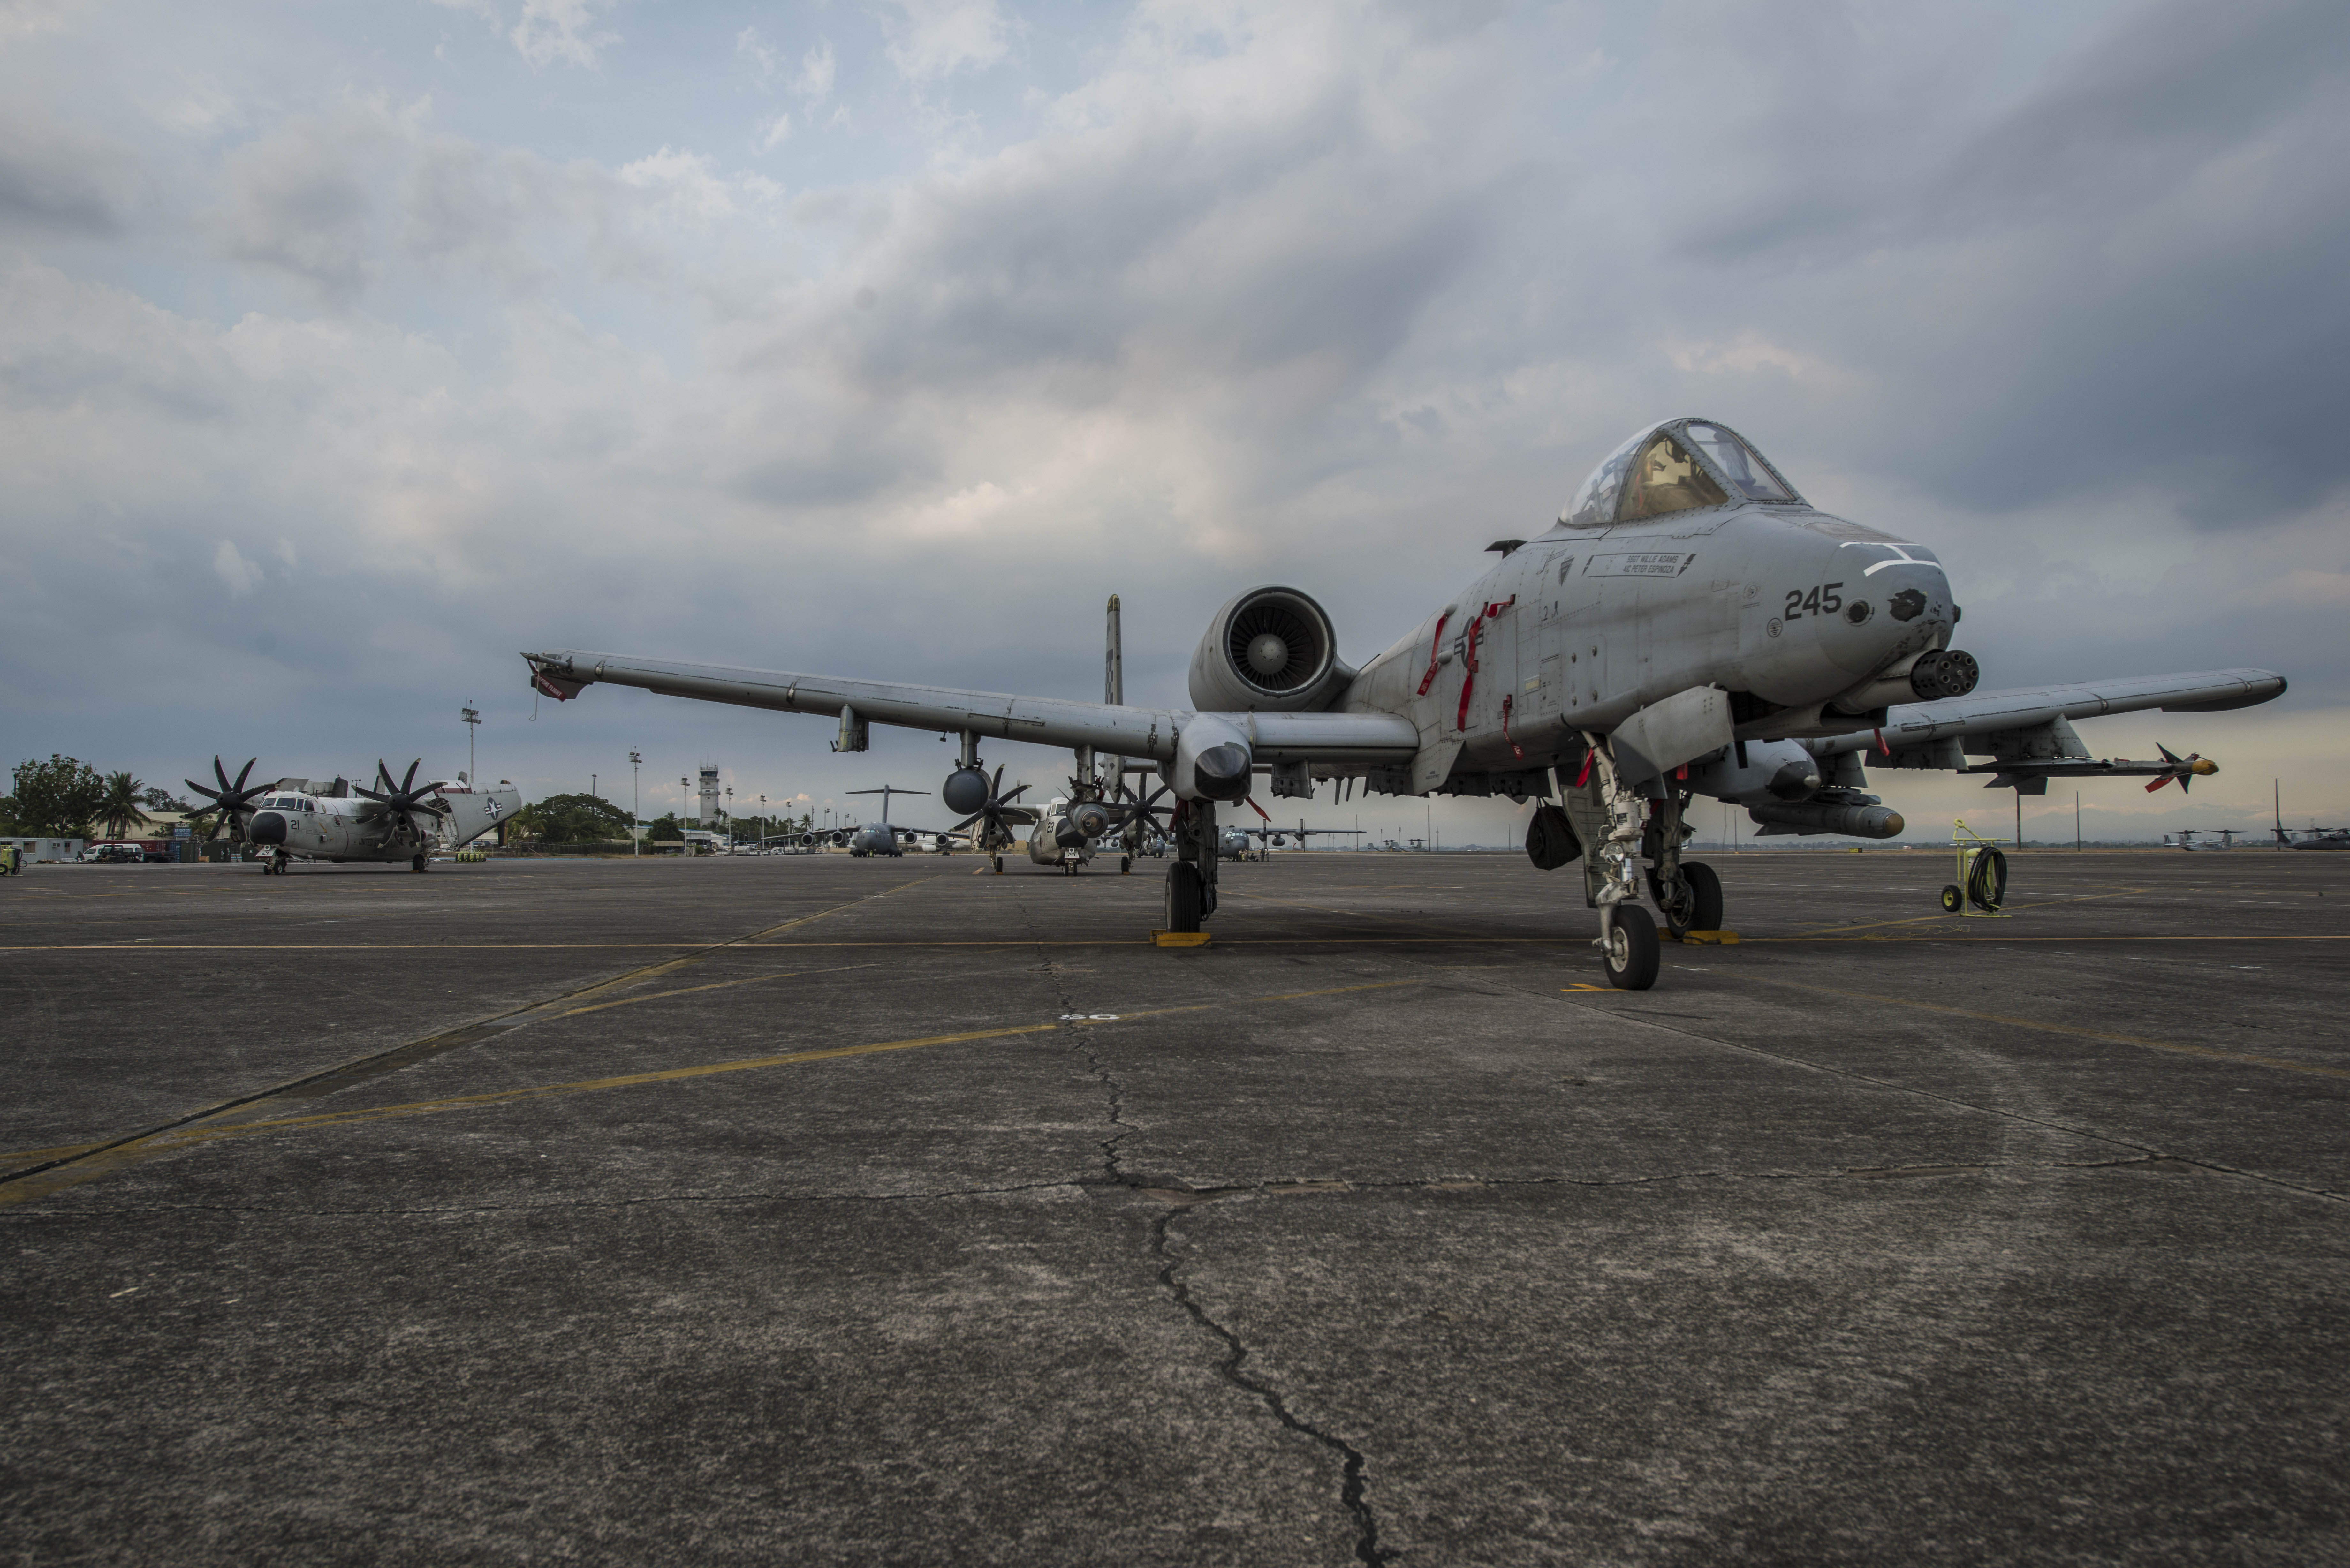 The A-10 ‘sparks panic’ in ISIS fighters, so why does the Air Force want to kill it?